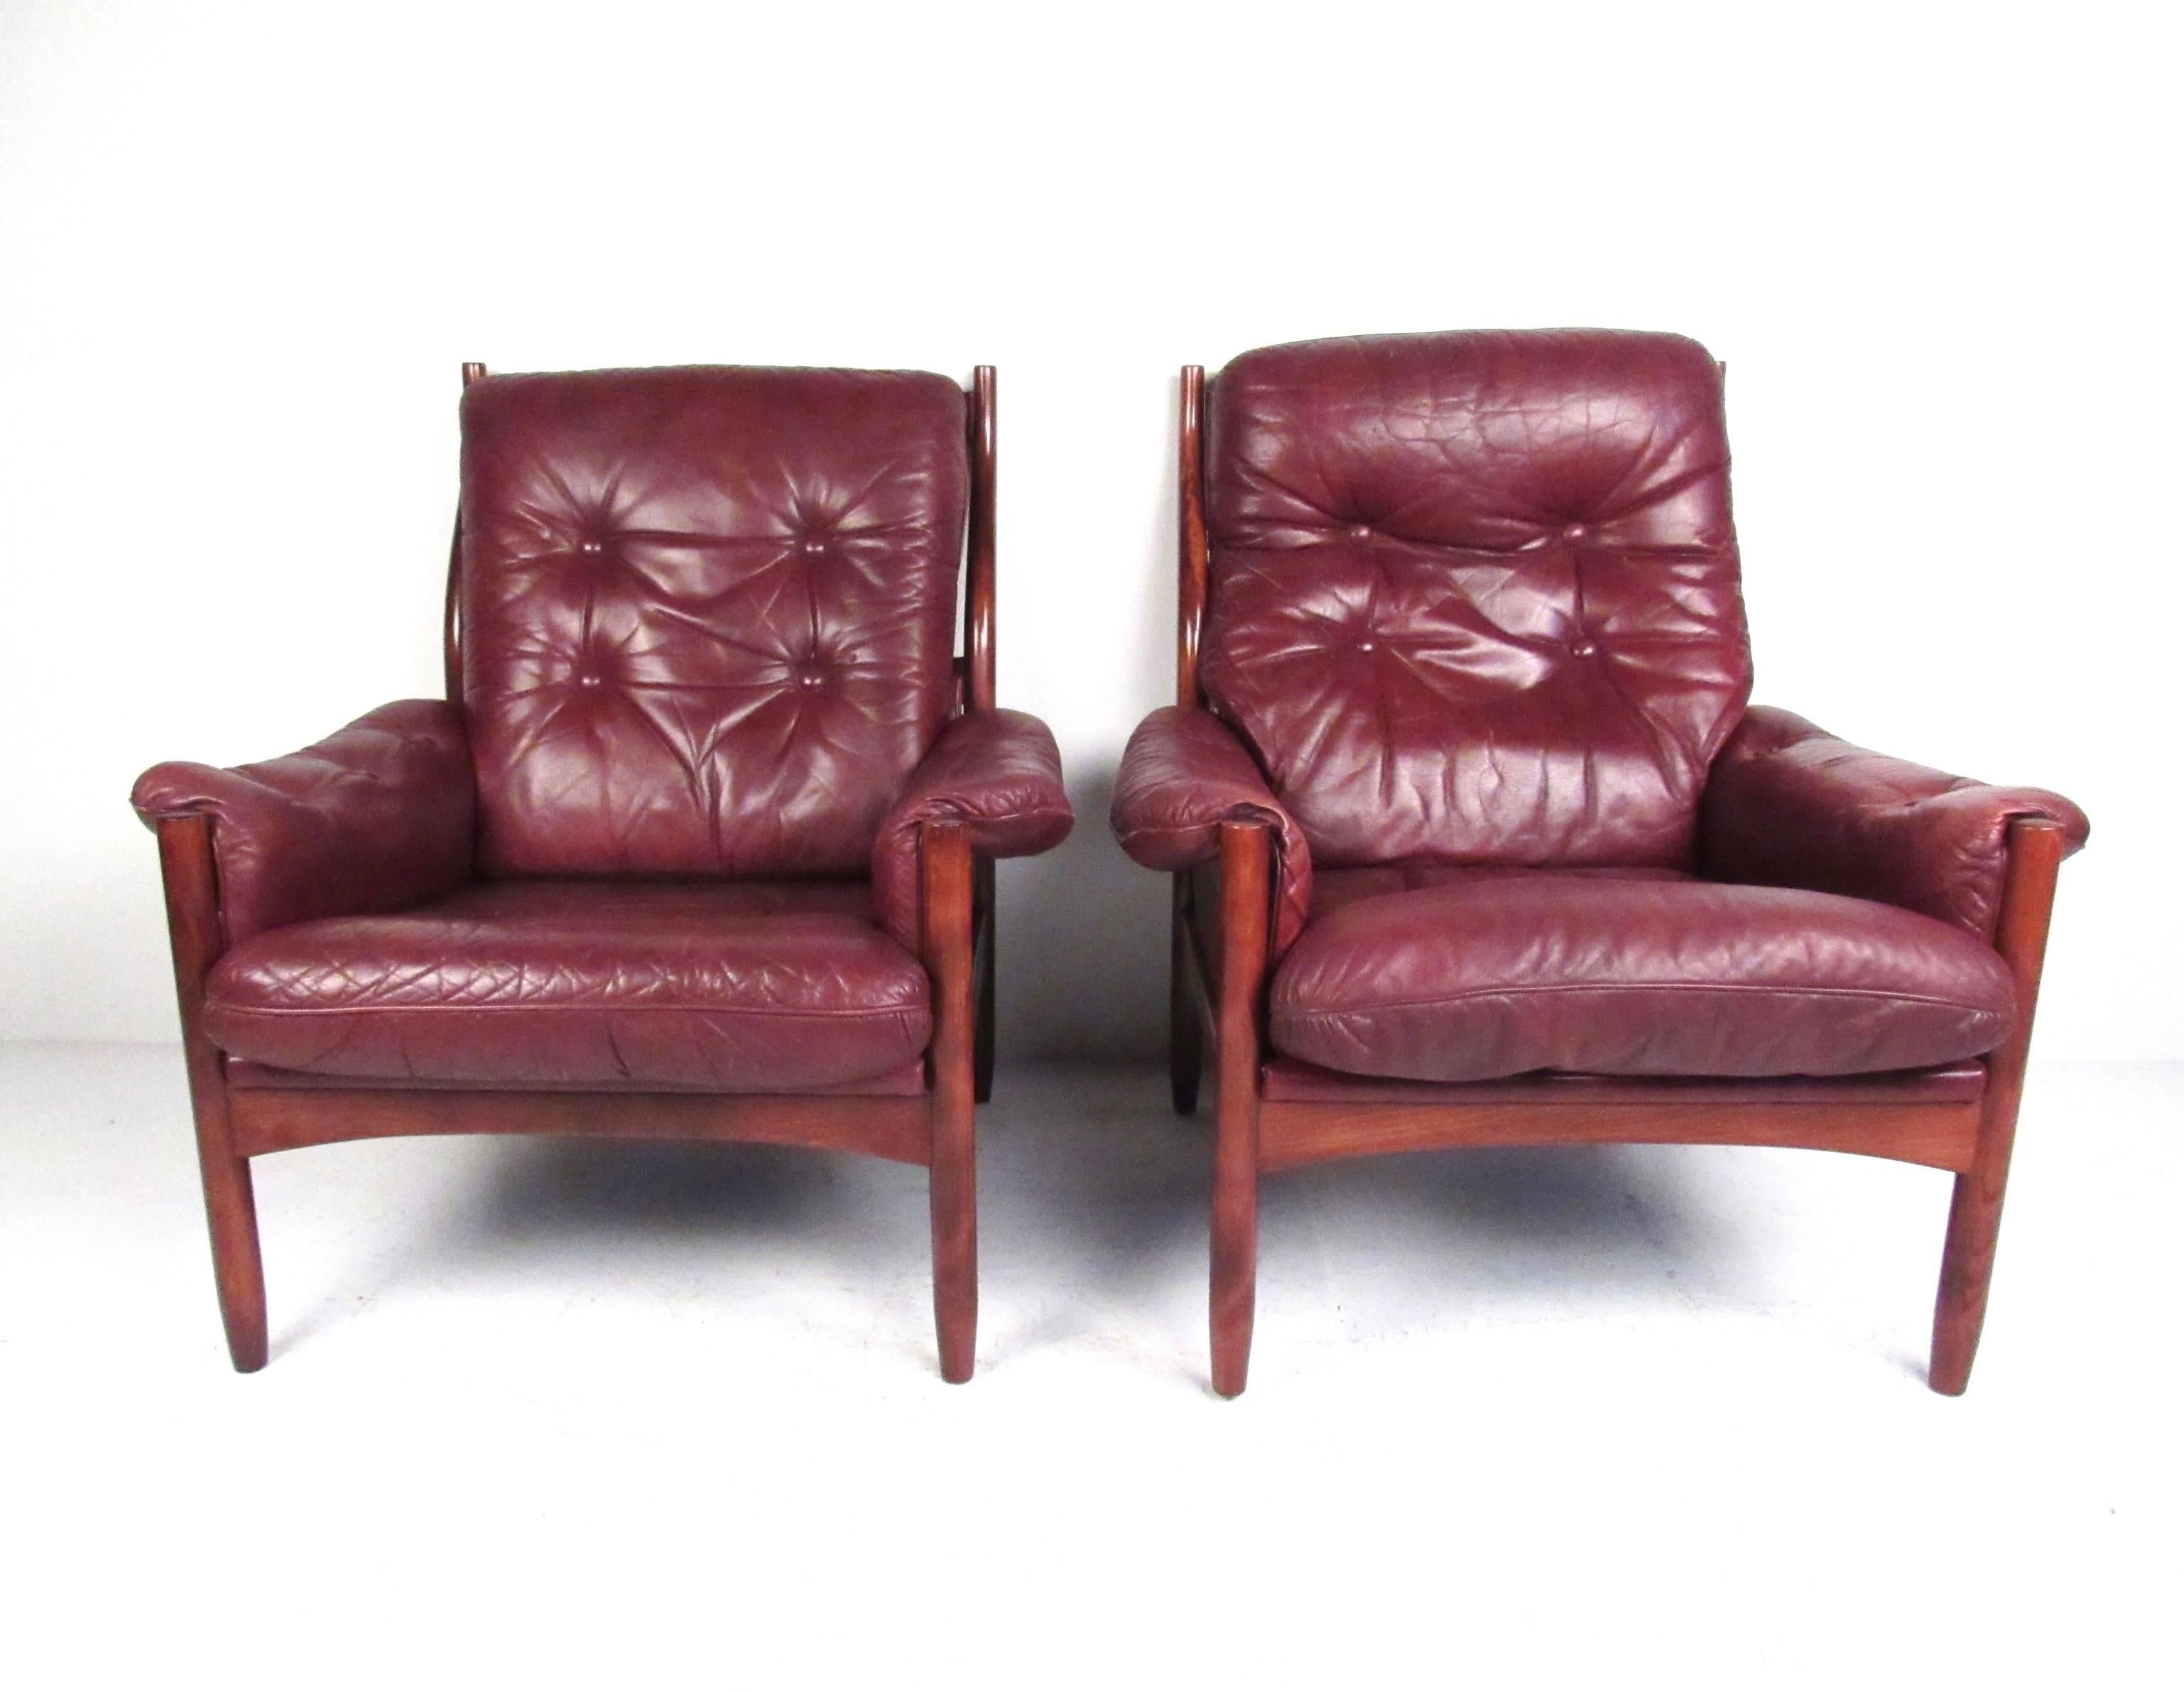 This beautiful pair Scandinavian Modern lounge chairs features tufted vintage leather, sleek and slender rosewood frame, and unique Danish design. The comfortable and stylish contour of the seat back adds to the mid-century appeal of the pair.